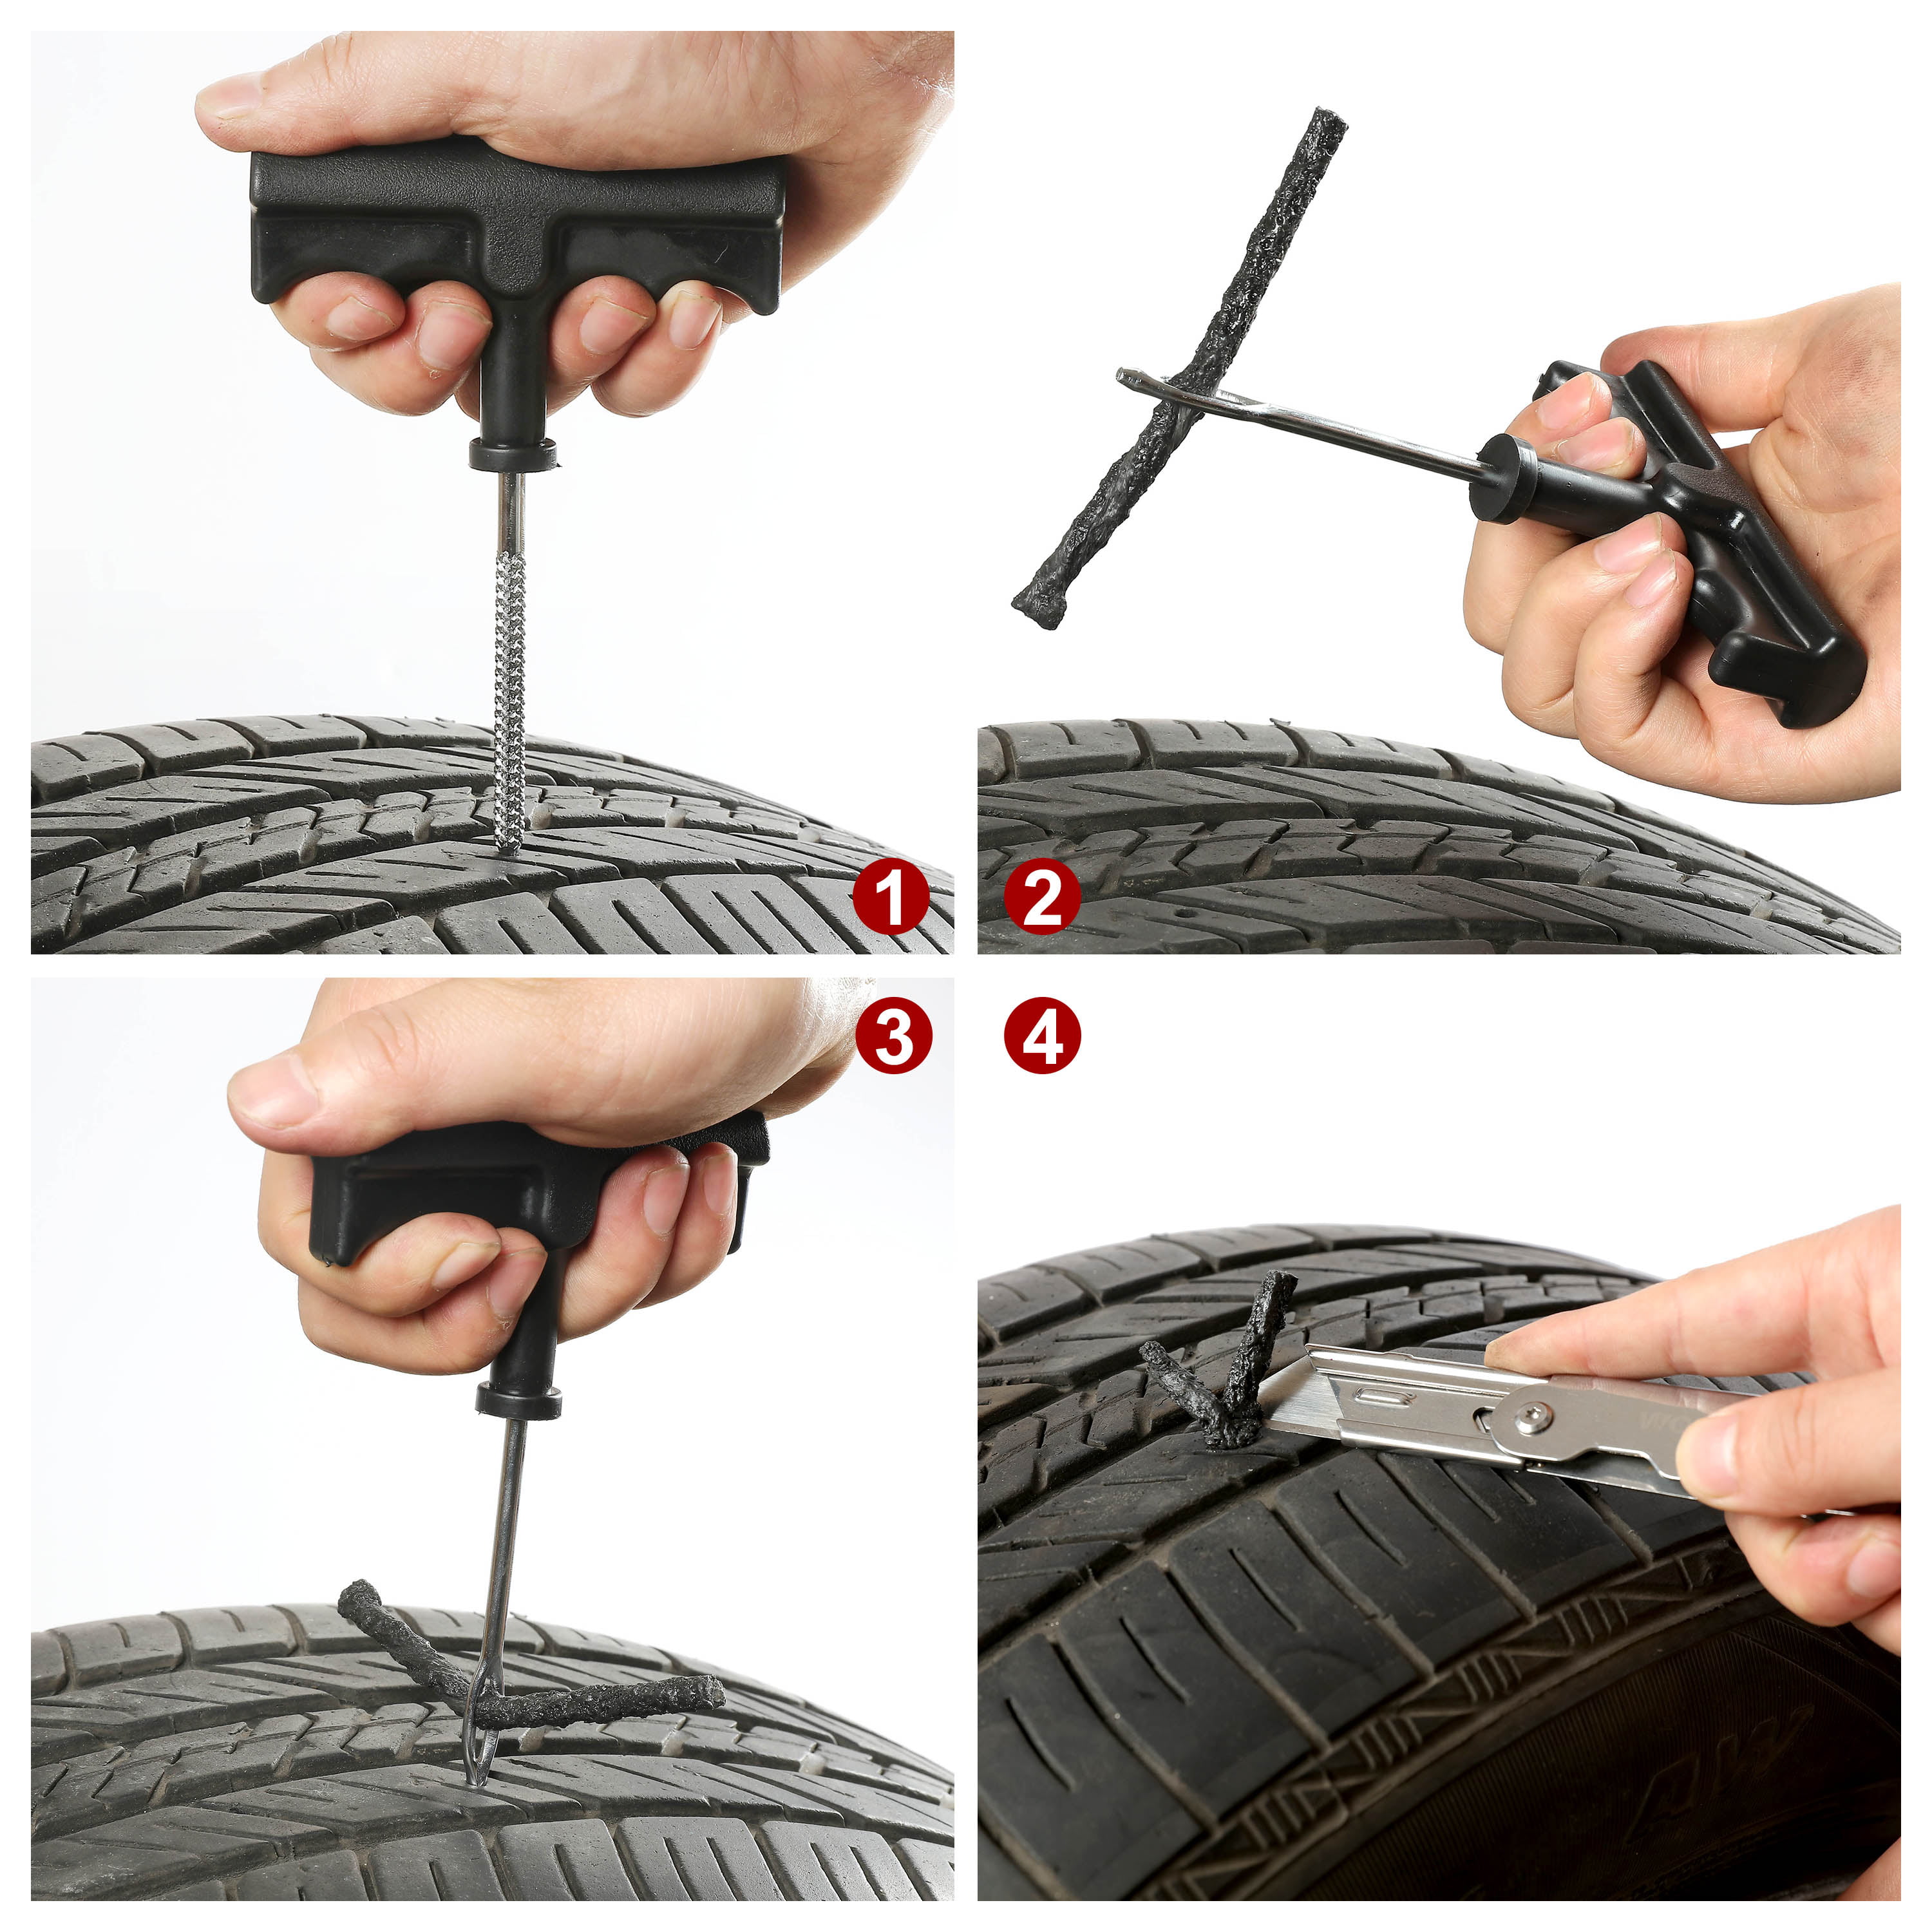 Details about   Brand new-9 piece Tire Repair Kit for Automotive & Truck Tire repairs 5 PLUGS